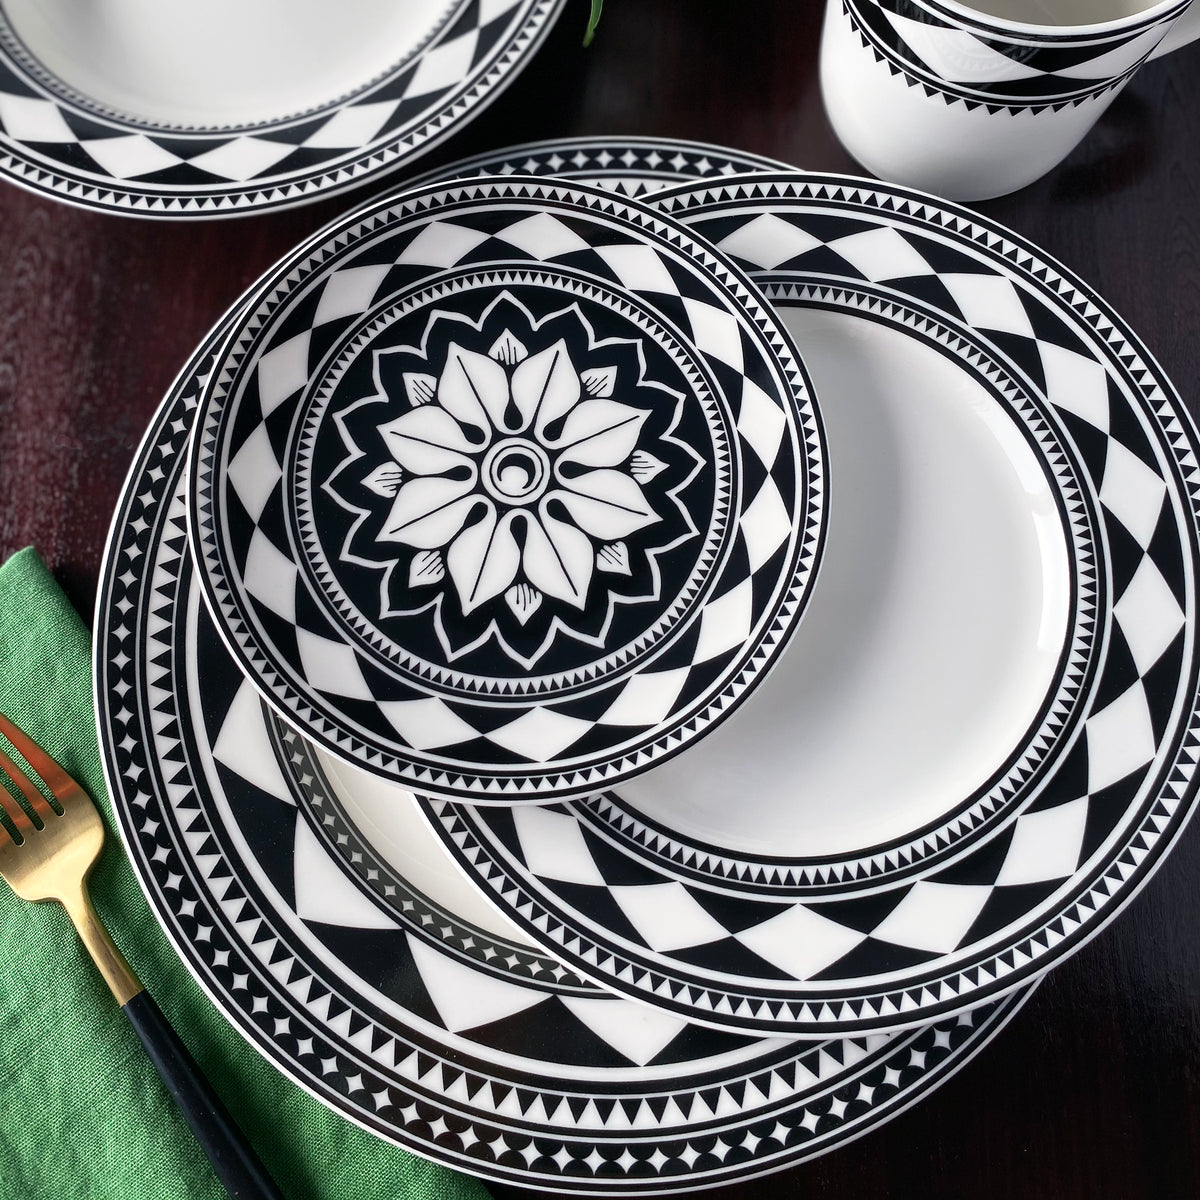 A set of Fez Black Rimmed Dinner Plates by Caskata Artisanal Home beautifully displayed on a stylish table.